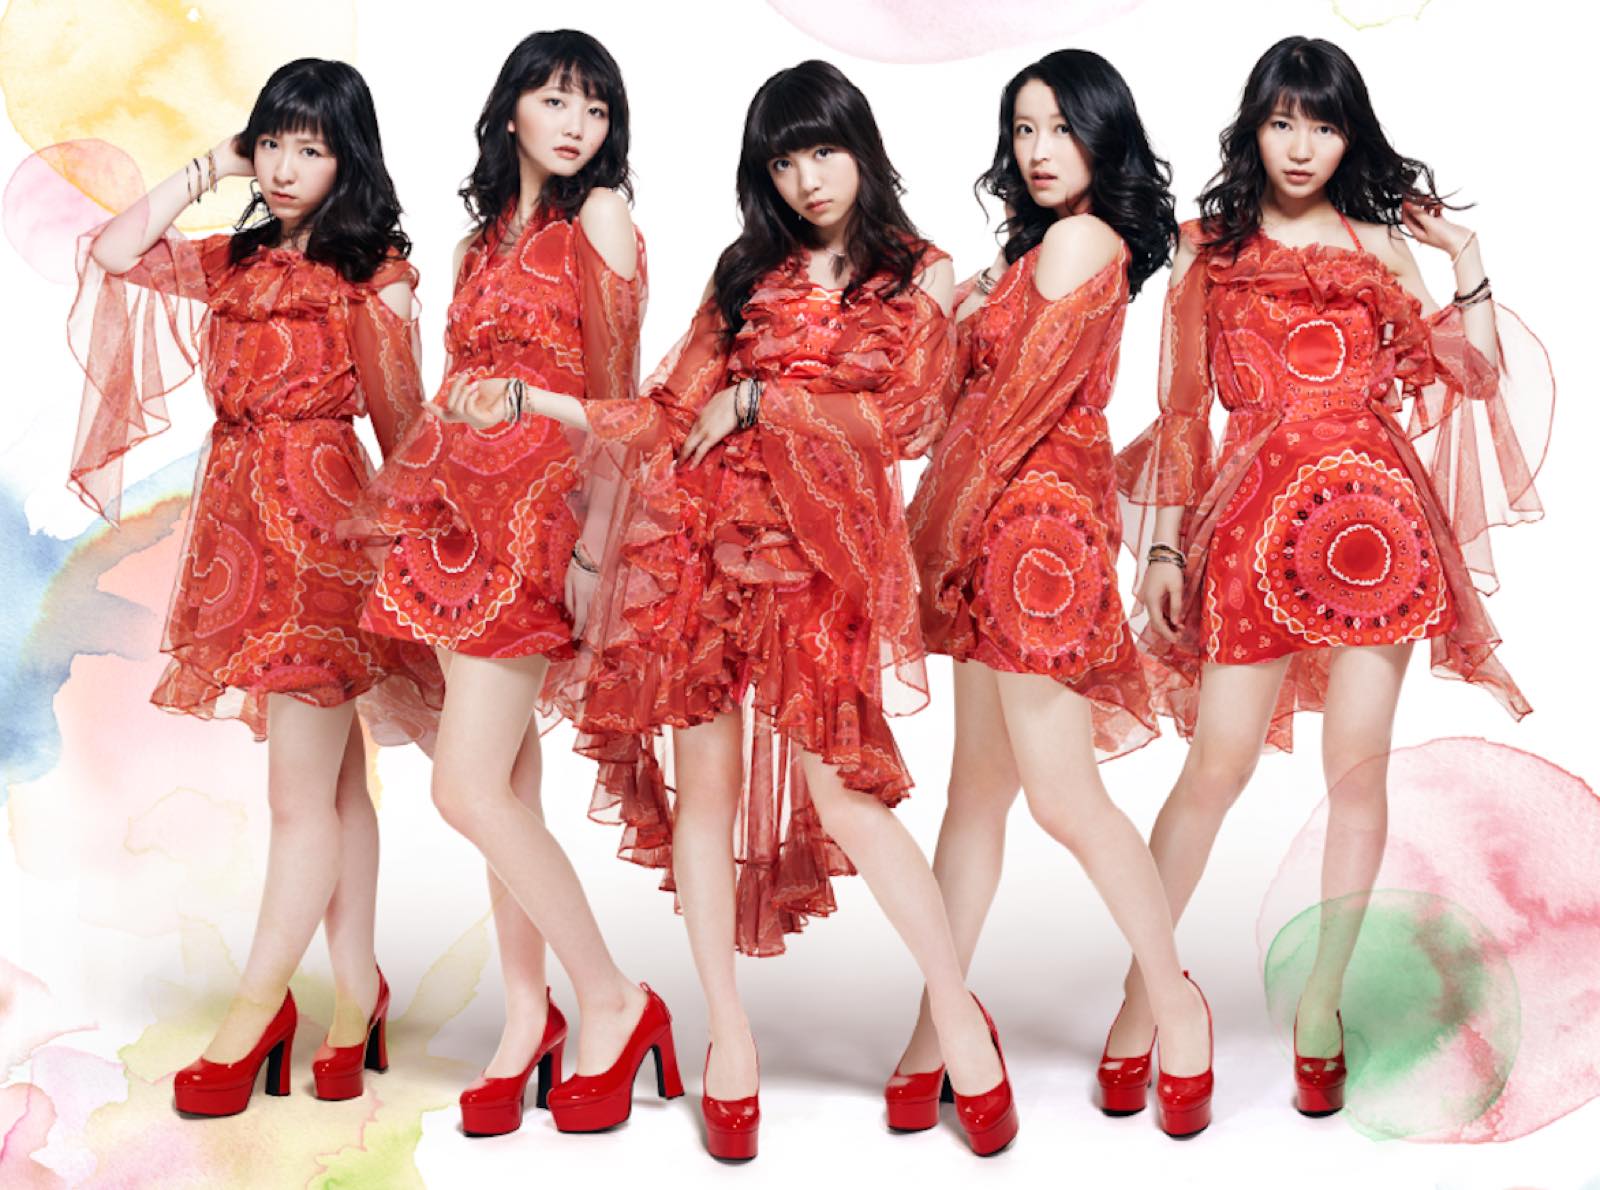 Get Your Questions Answered by TOKYO GIRLS’ STYLE at Our Global TV Program on NHK World!